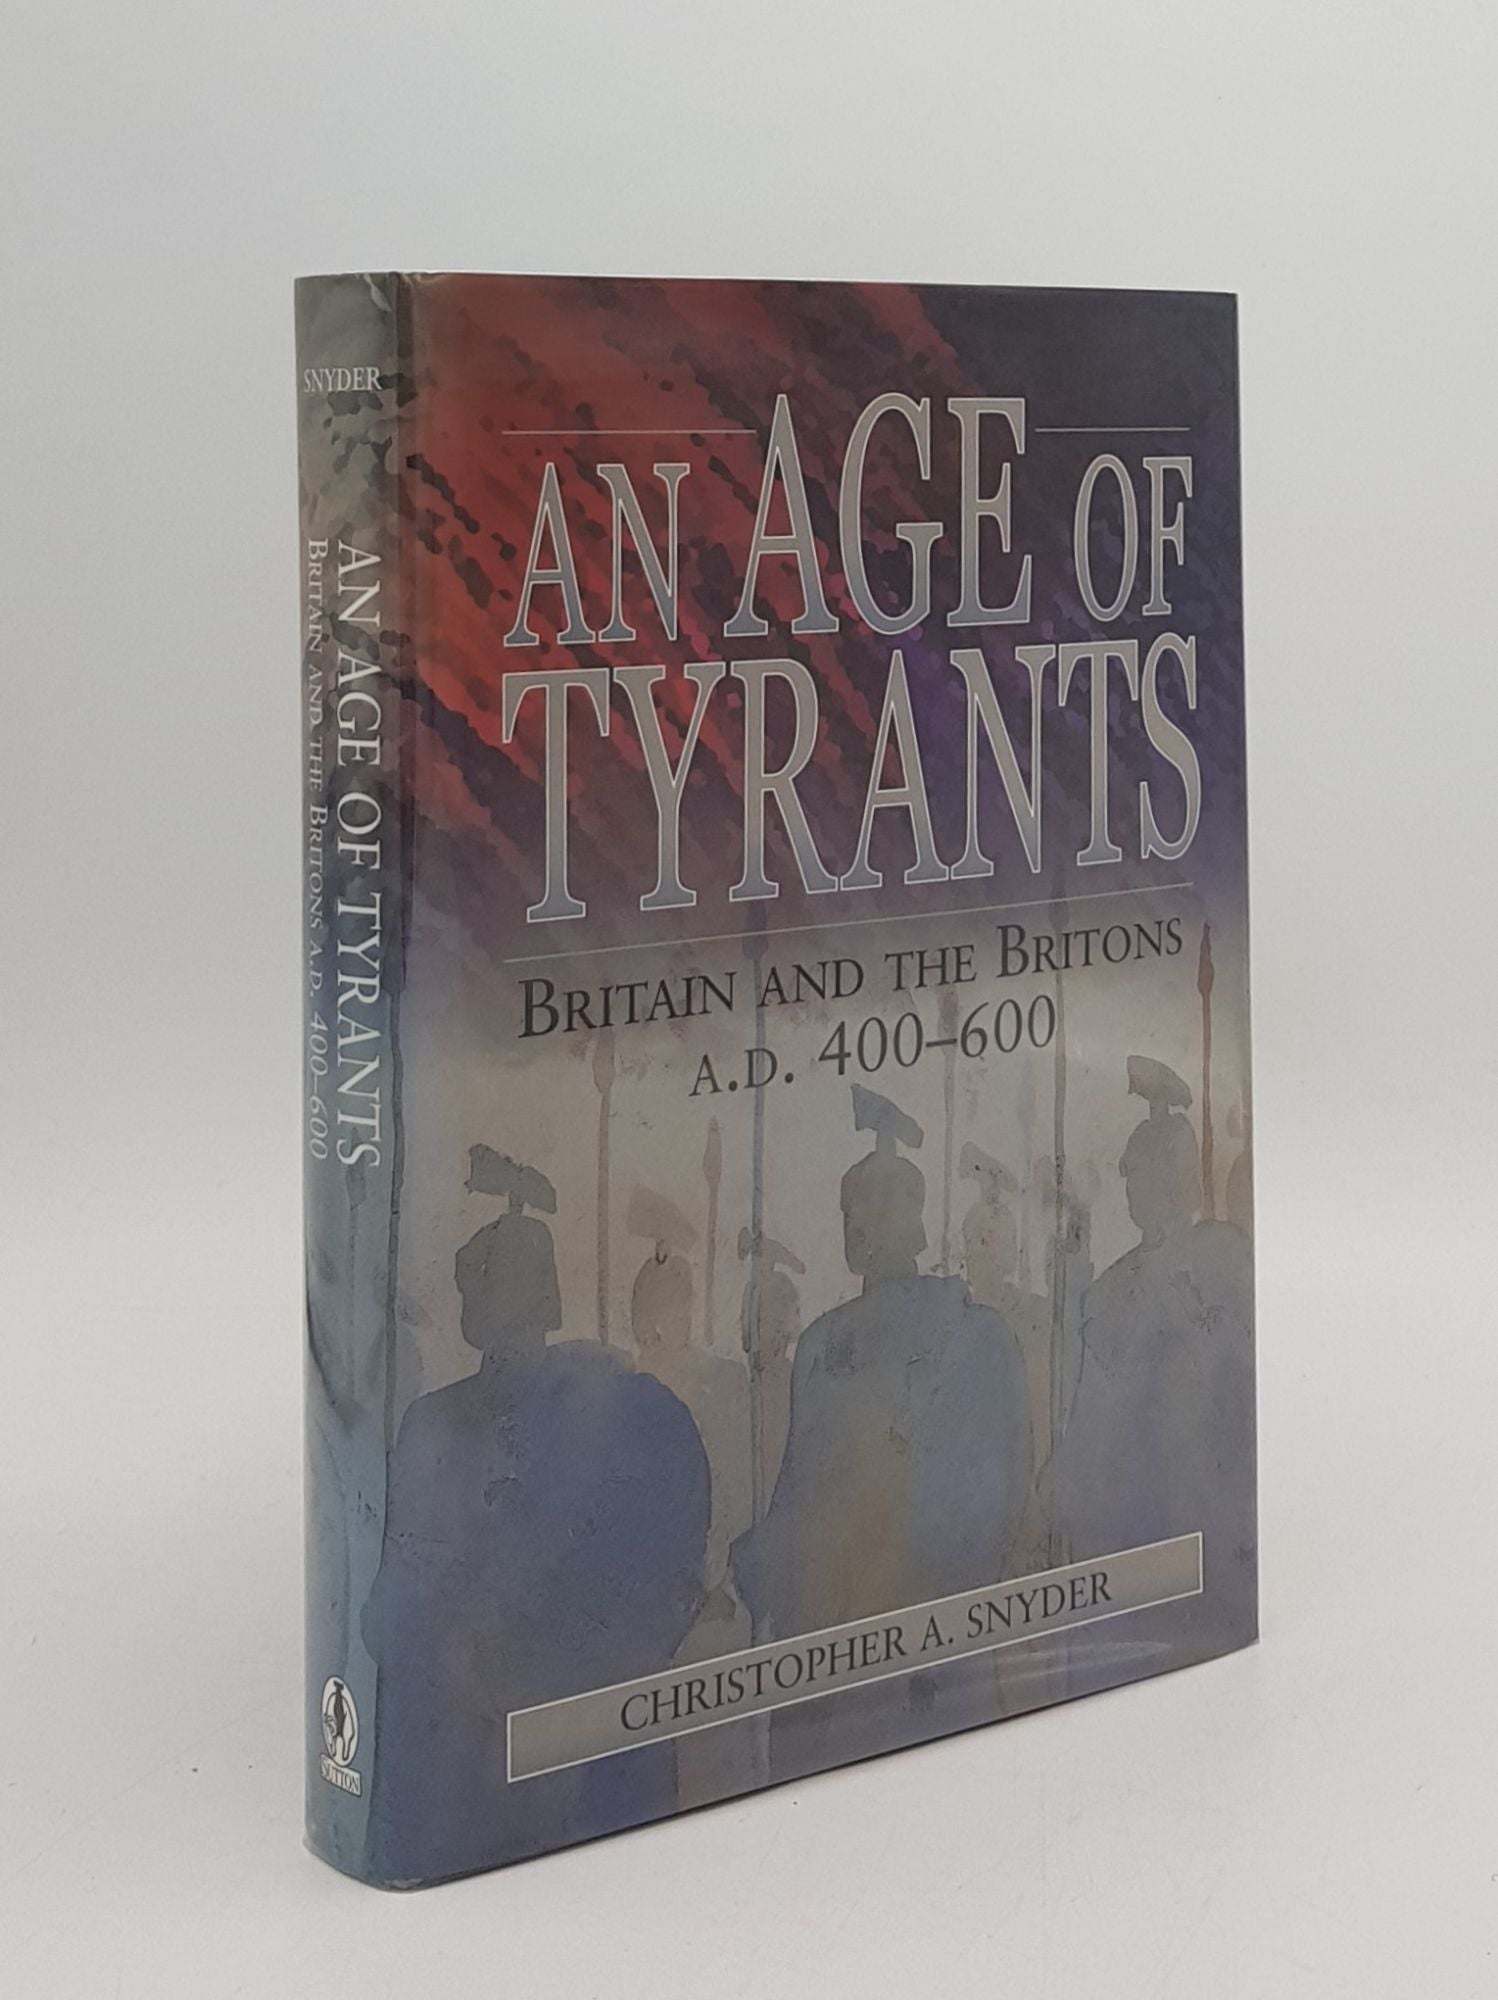 SNYDER Christopher A. - An Age of Tyrants Britain and the Britons A.D. 400-600